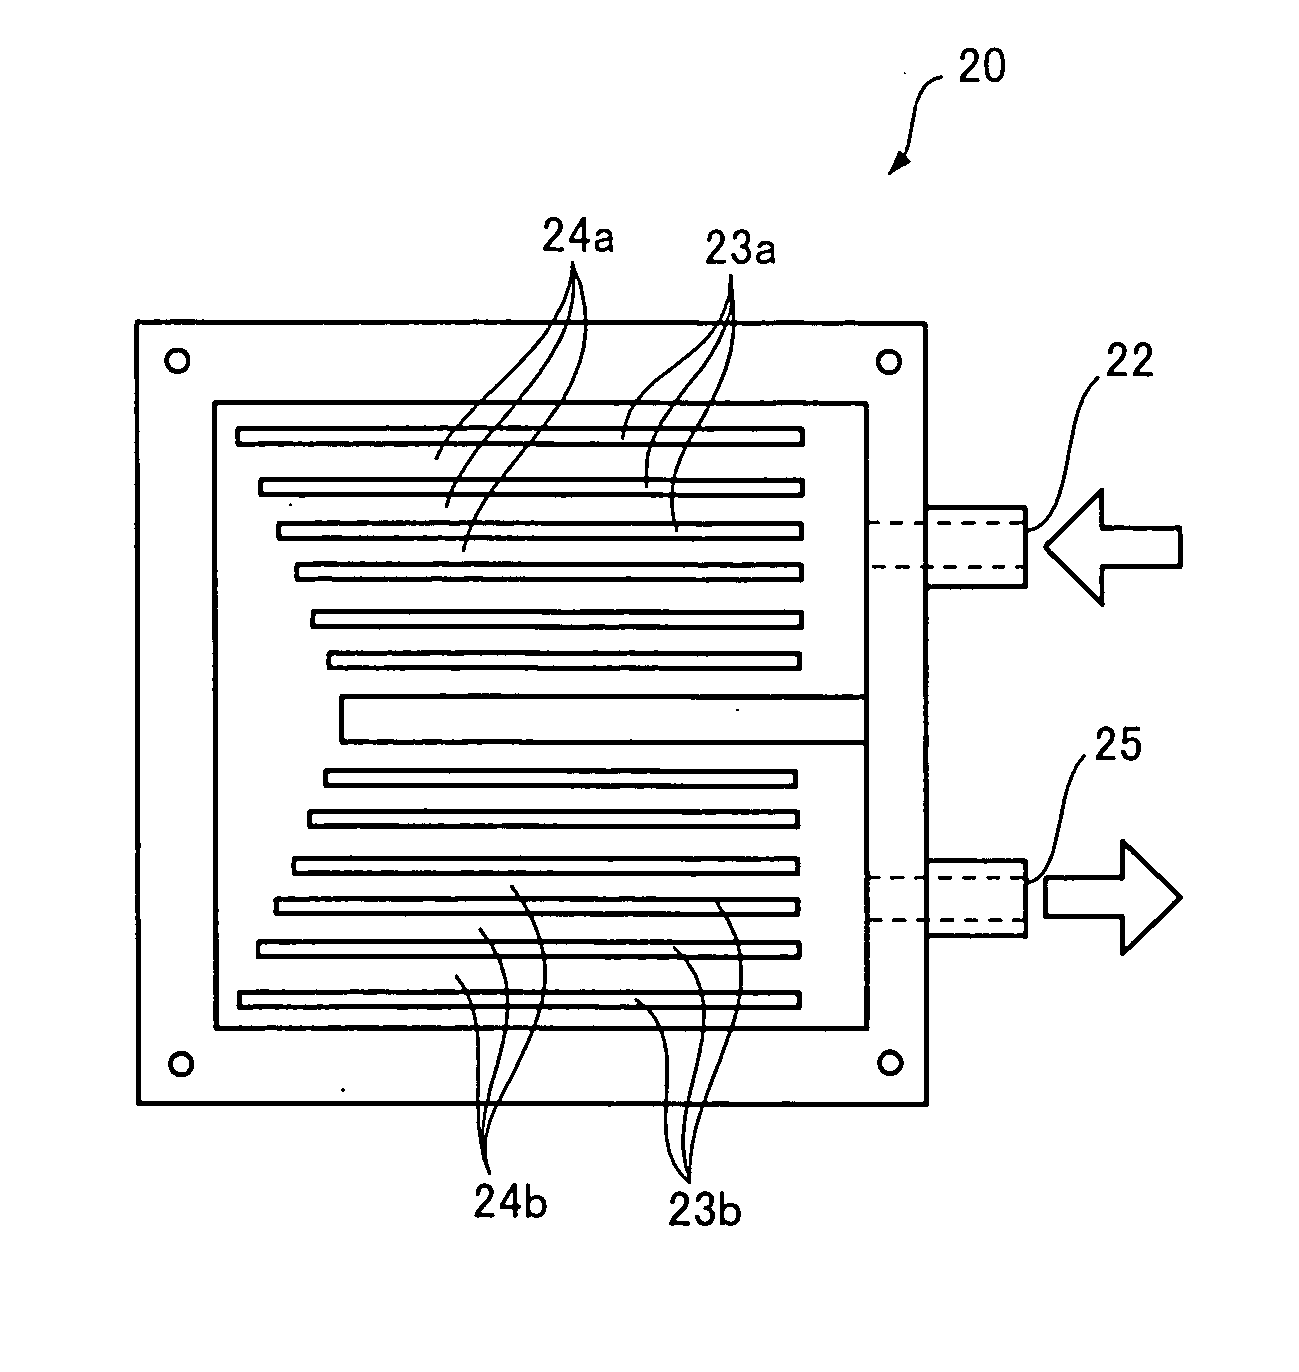 Semiconductor device cooling apparatus